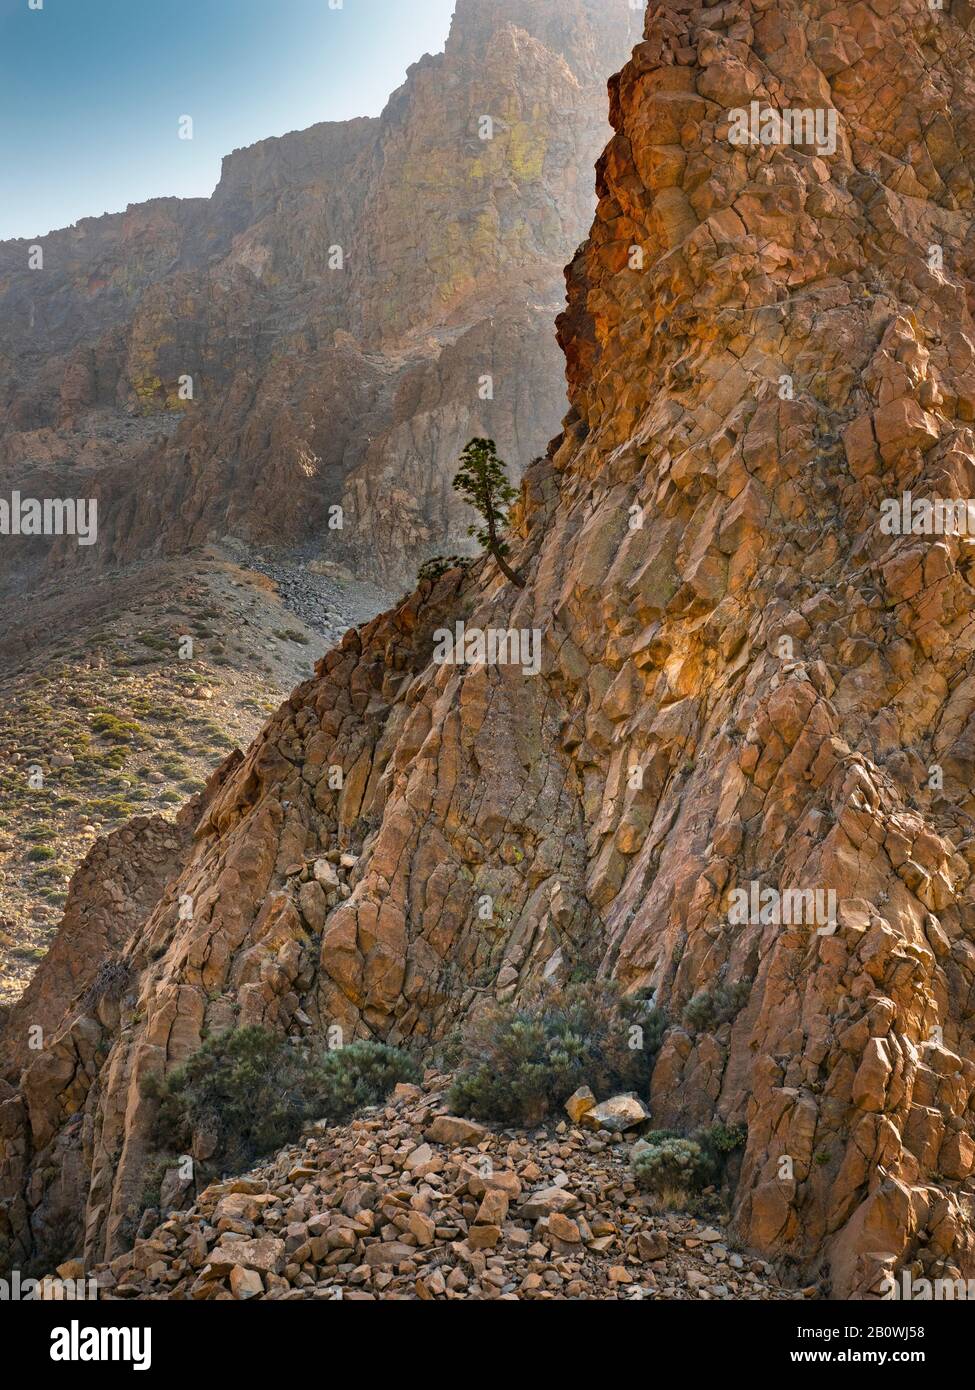 Mount Teide National park rock formations and lone pine Tenerife in the Canary Islands, Spain Stock Photo